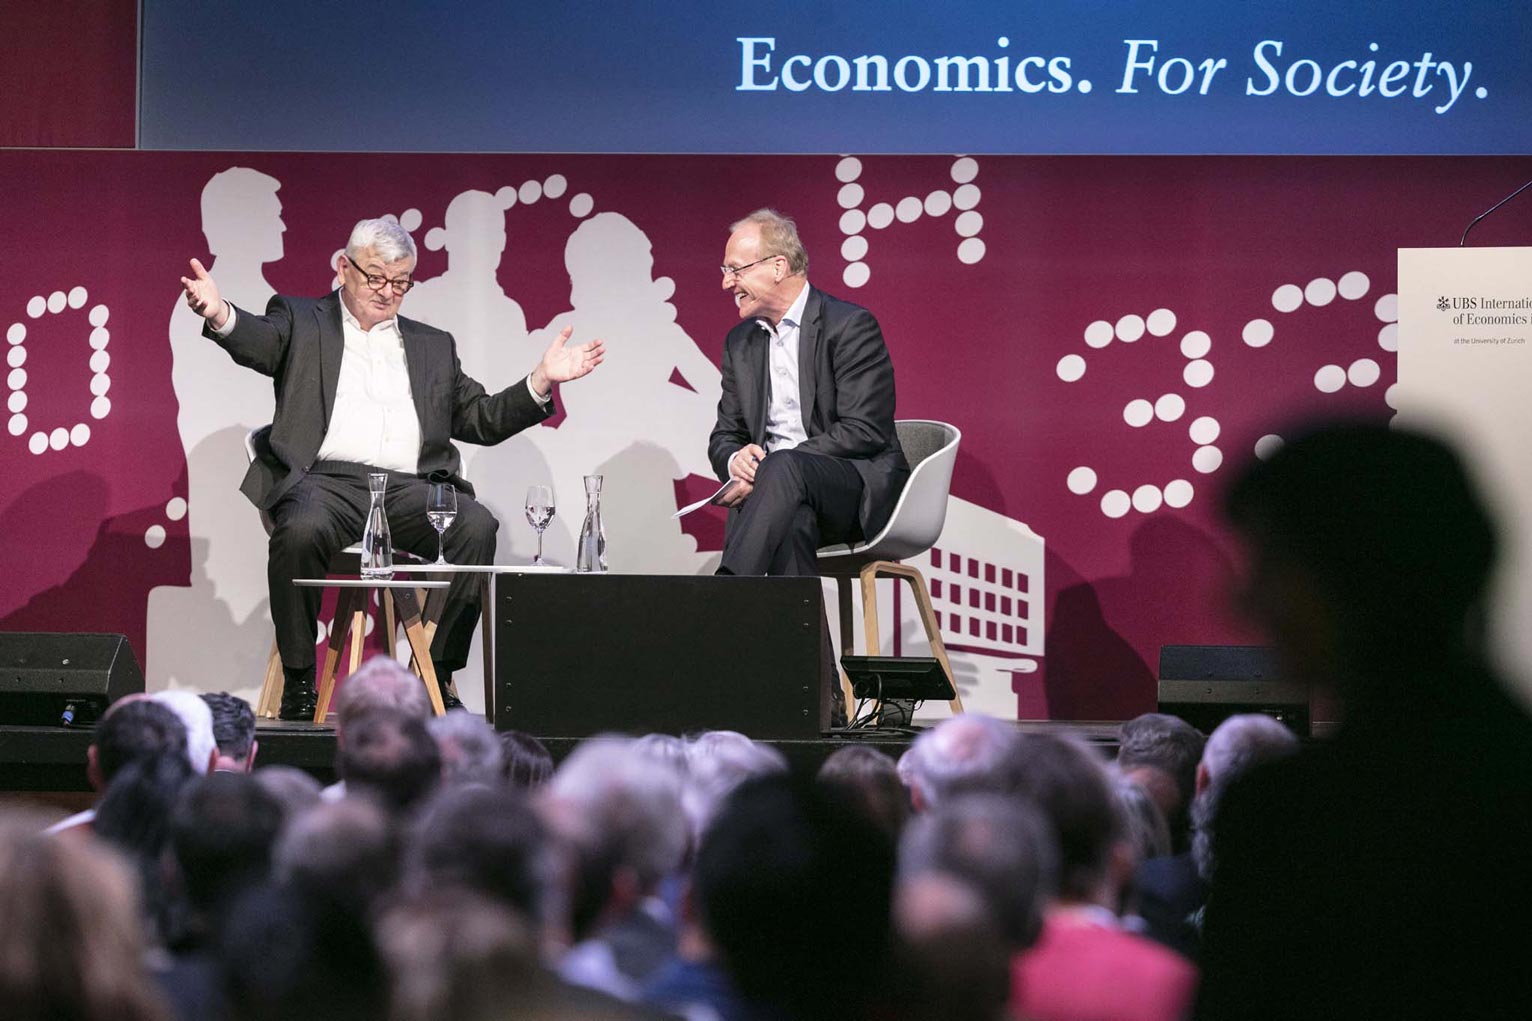 UBS Center Director Ernst Fehr (on the right) in conversation with Joschka Fischer, Former Foreign Minister and Vice Chancellor of Germany.